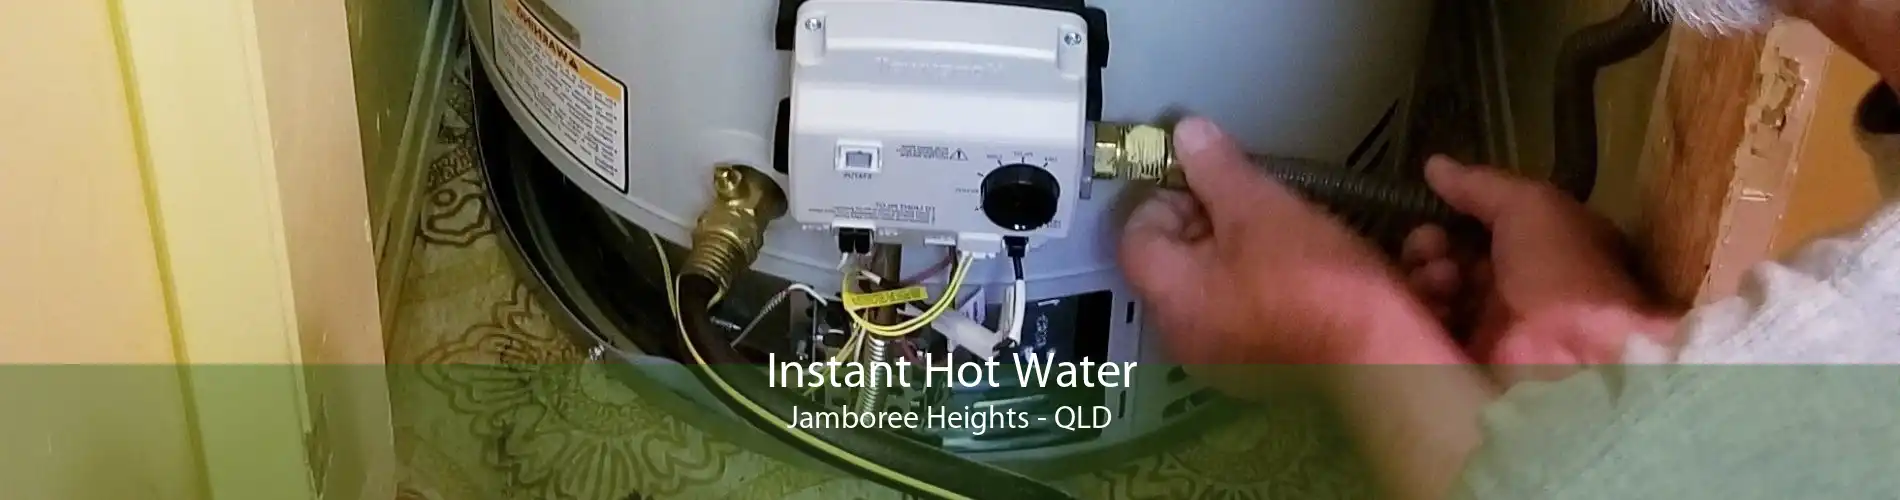 Instant Hot Water Jamboree Heights - QLD